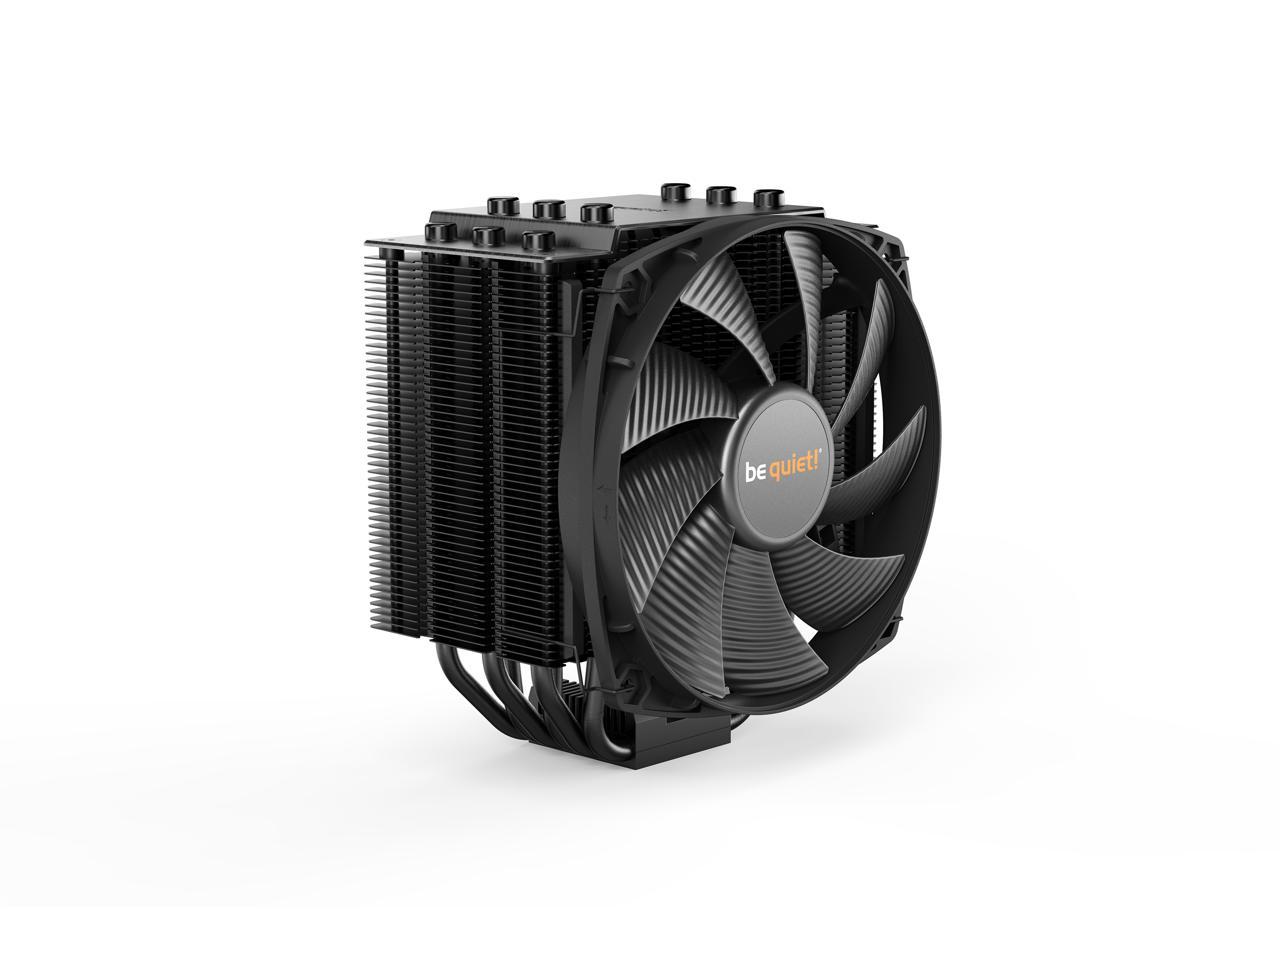 renere Beregn Perforering be quiet! Dark Rock 4 CPU Cooler with Silent Wings, 200W TDP, High  Performance - Silent Wings 135mm PWM LGA 1700 Compatible - Newegg.com